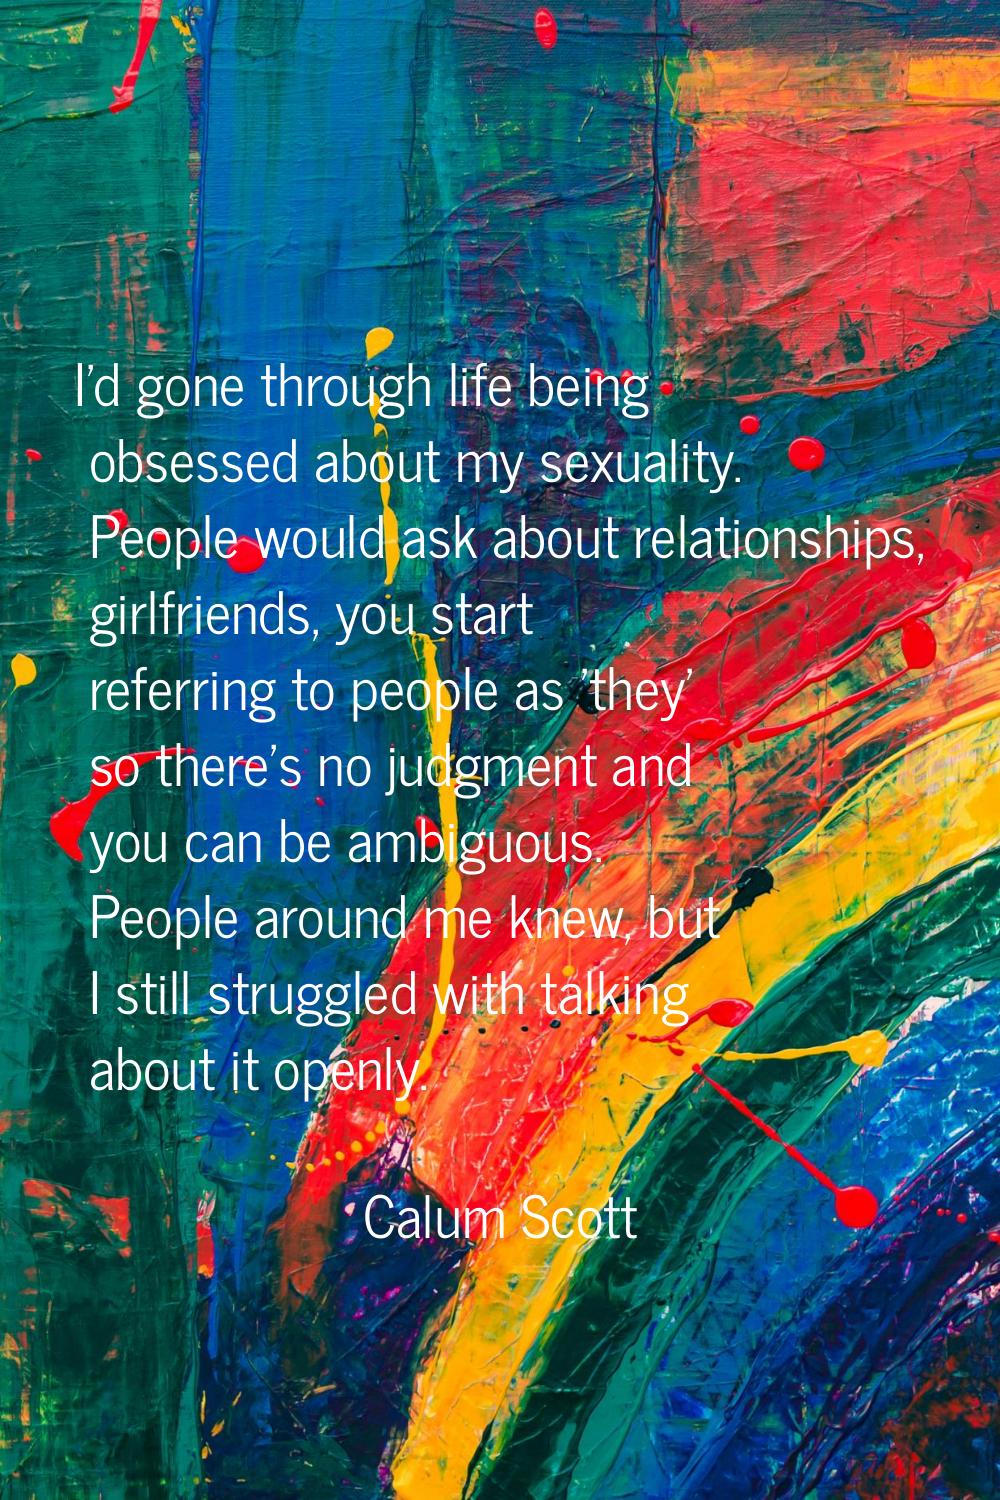 I'd gone through life being obsessed about my sexuality. People would ask about relationships, girl